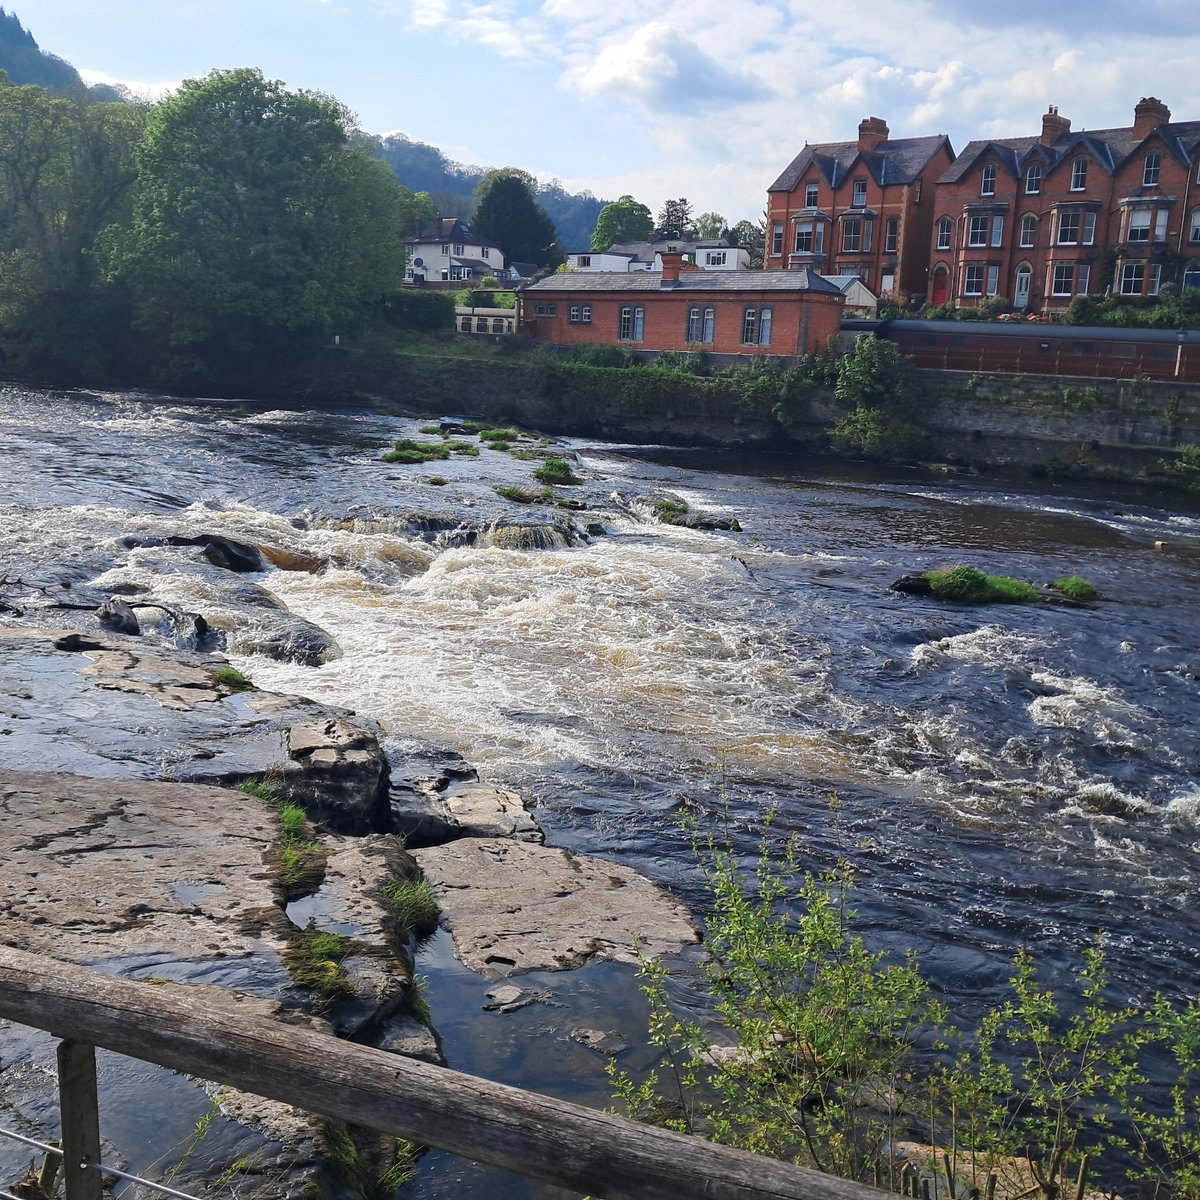 Dinner by the #RiverDee #TheCornmill #Llangollen